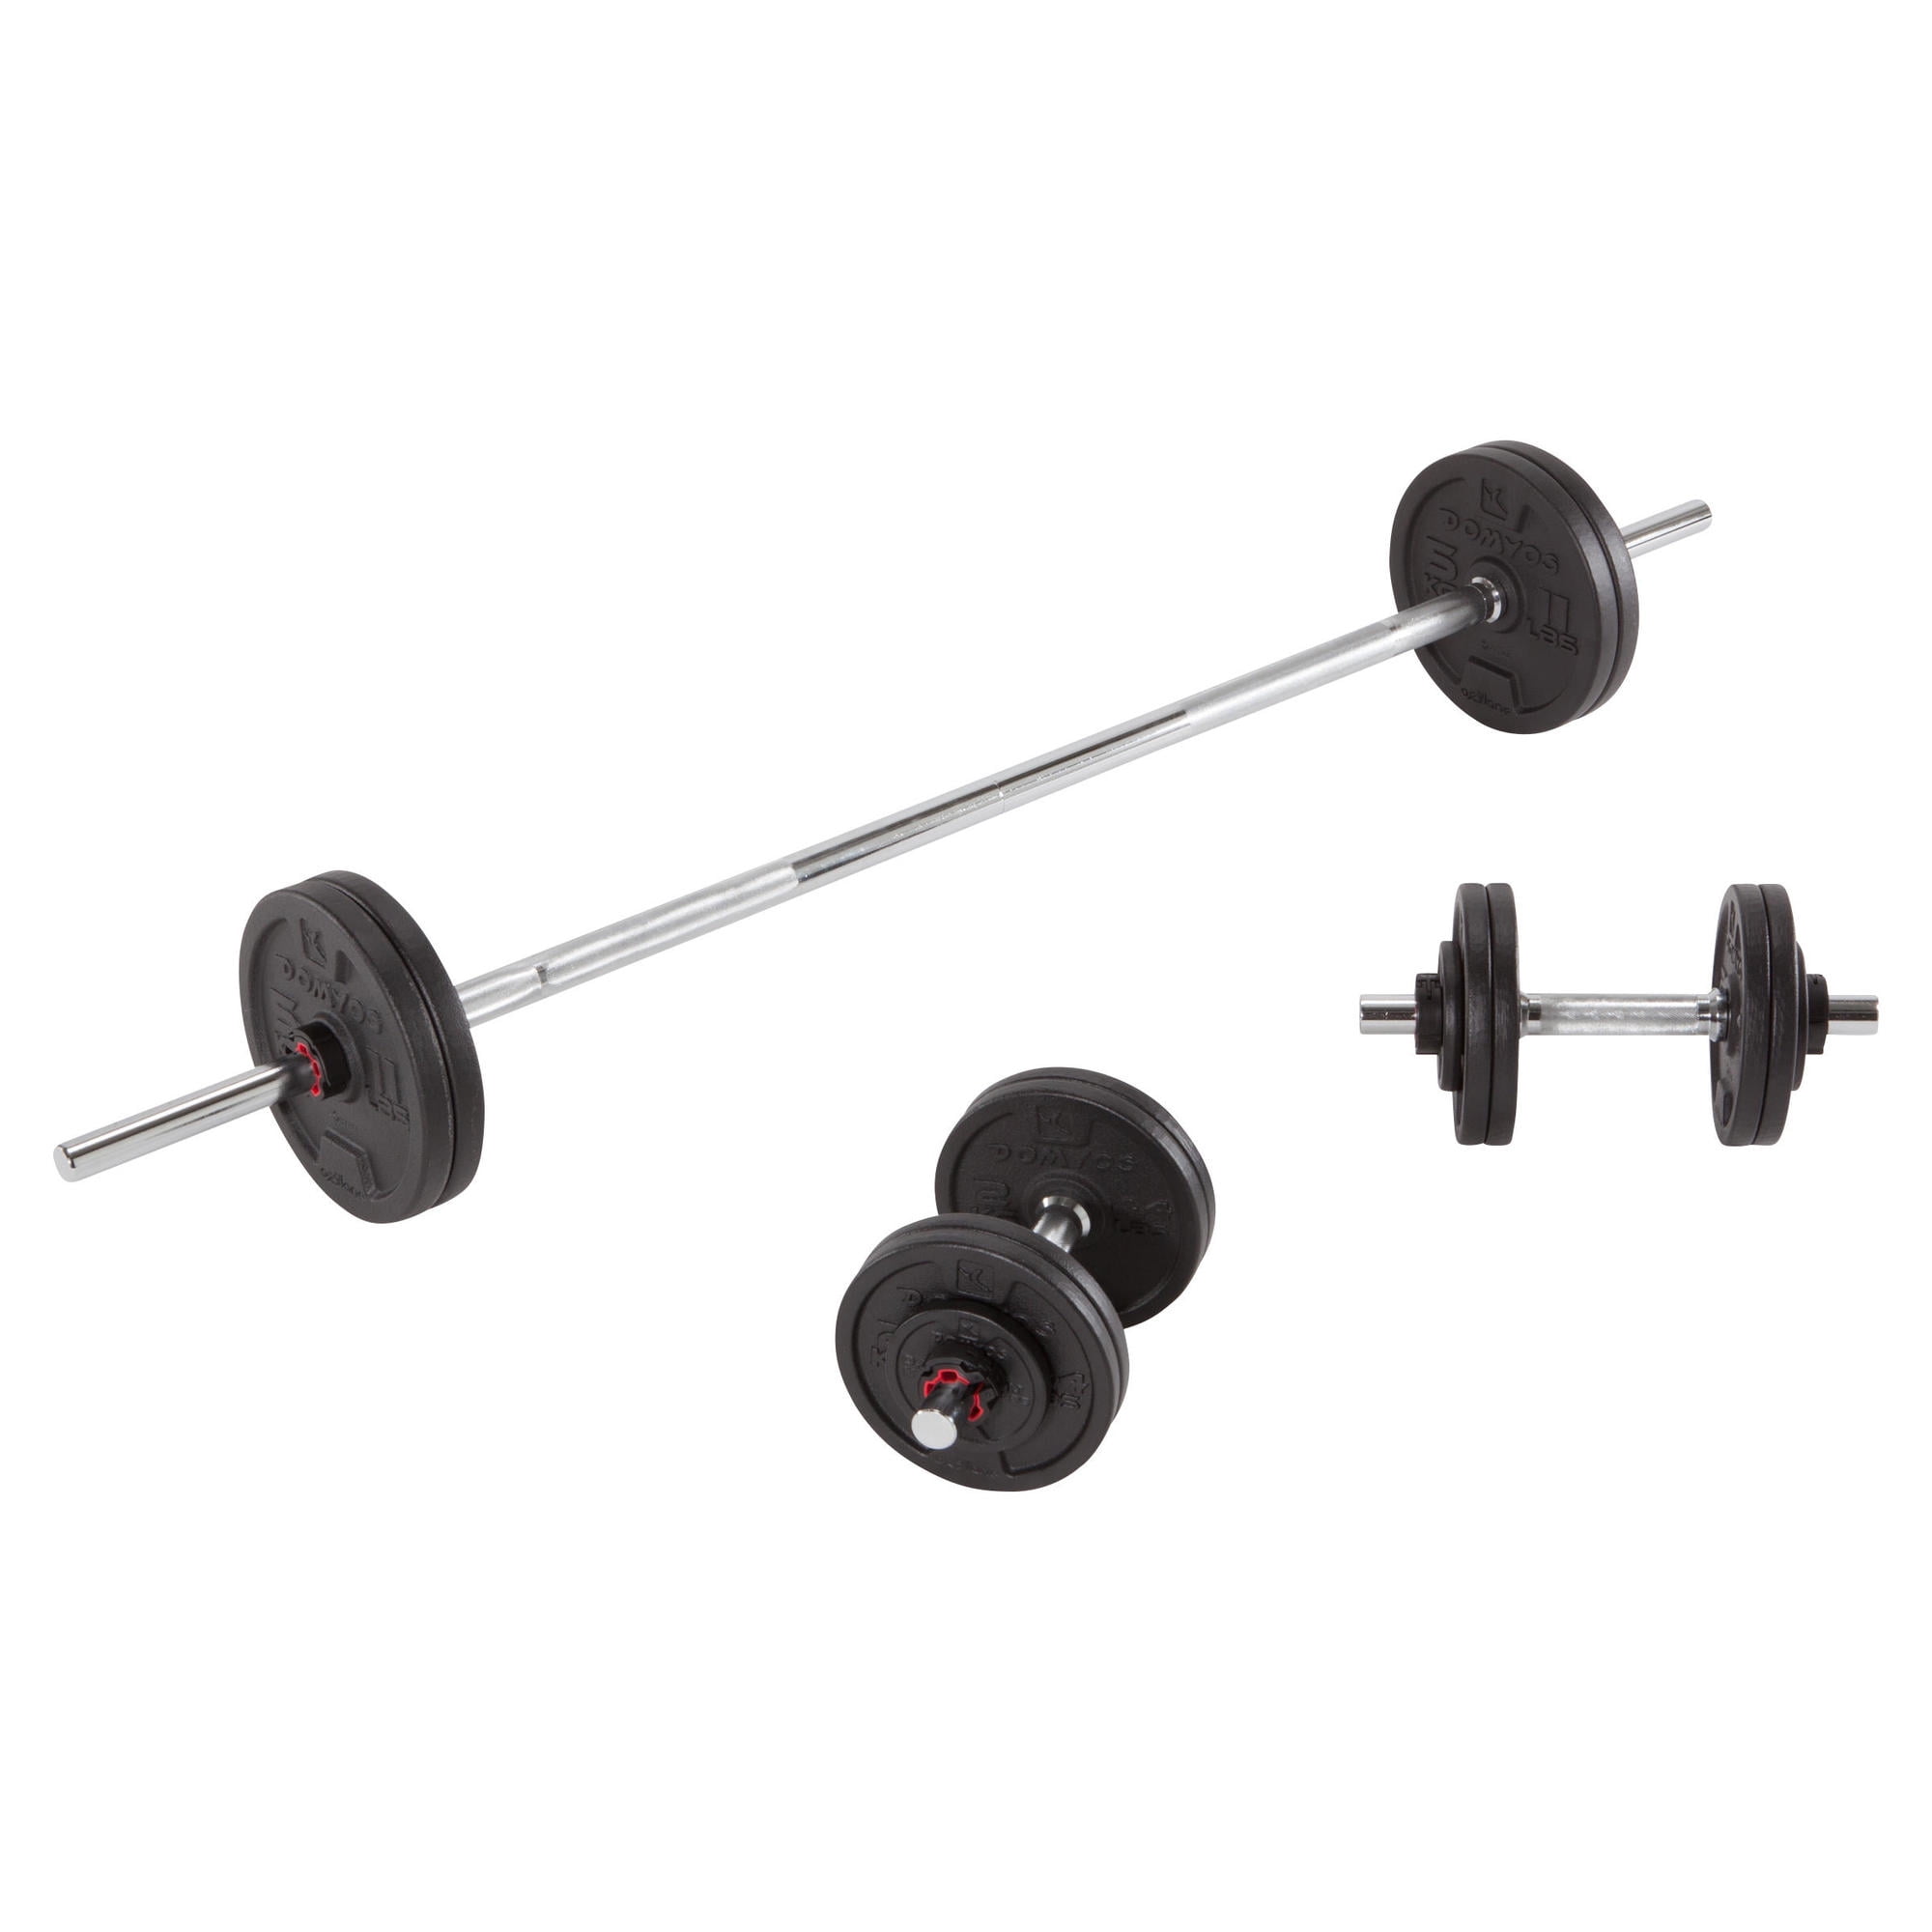 110LBS Weight Dumbbell Set Adjustable Fitness GYM Home Cast Full Steel Plates 